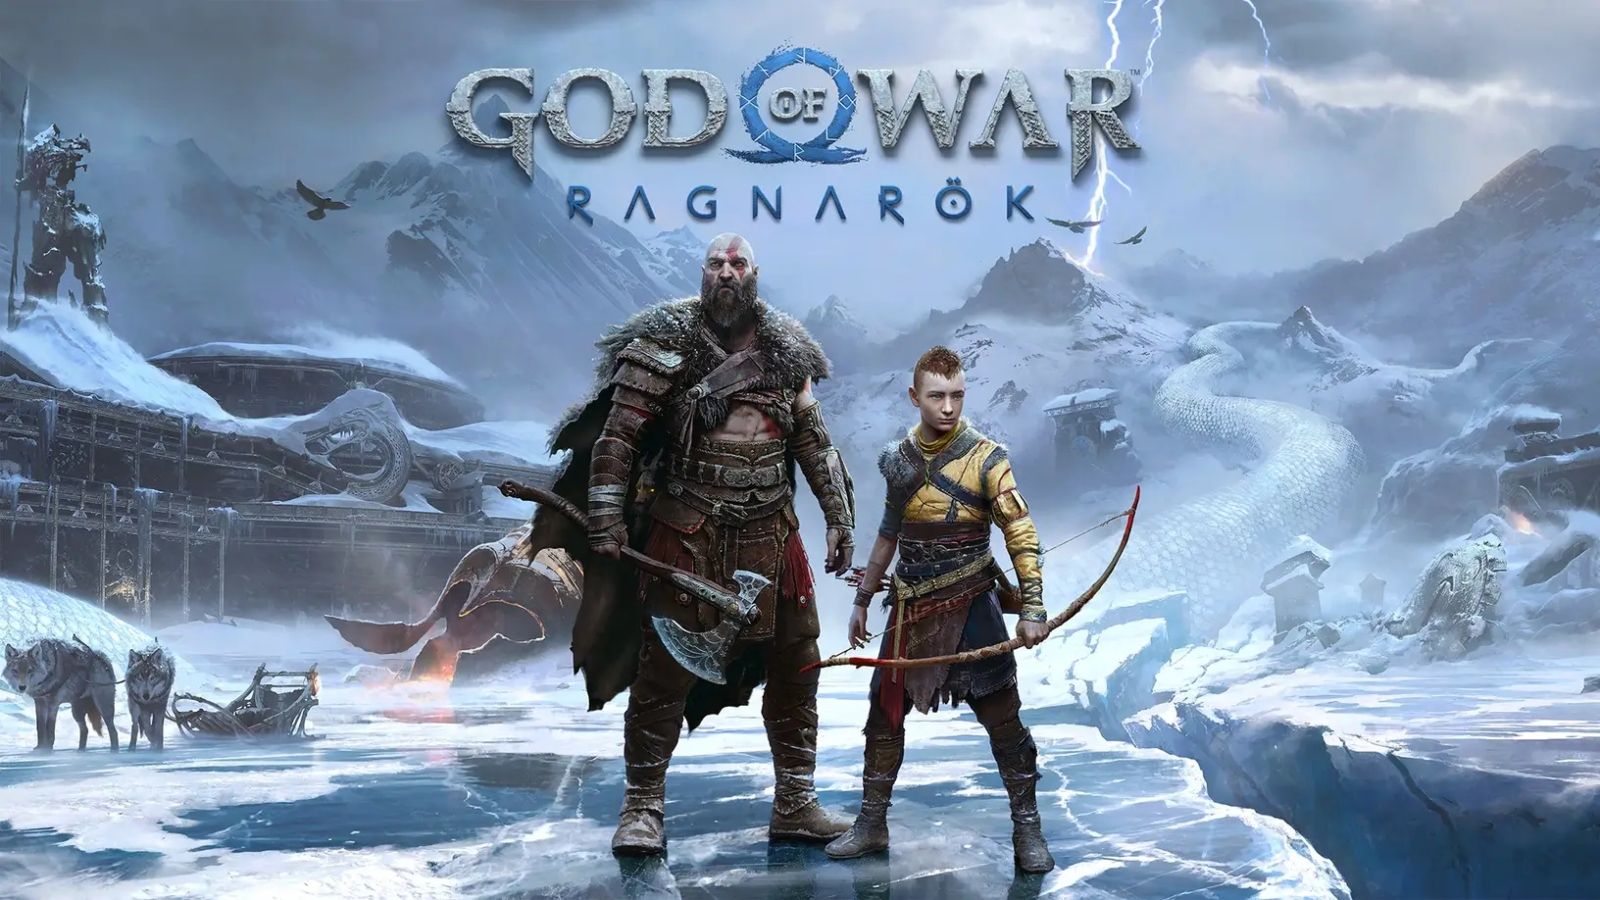 Kratos and Atreus stand ready on the box art for God of War Ragnarok